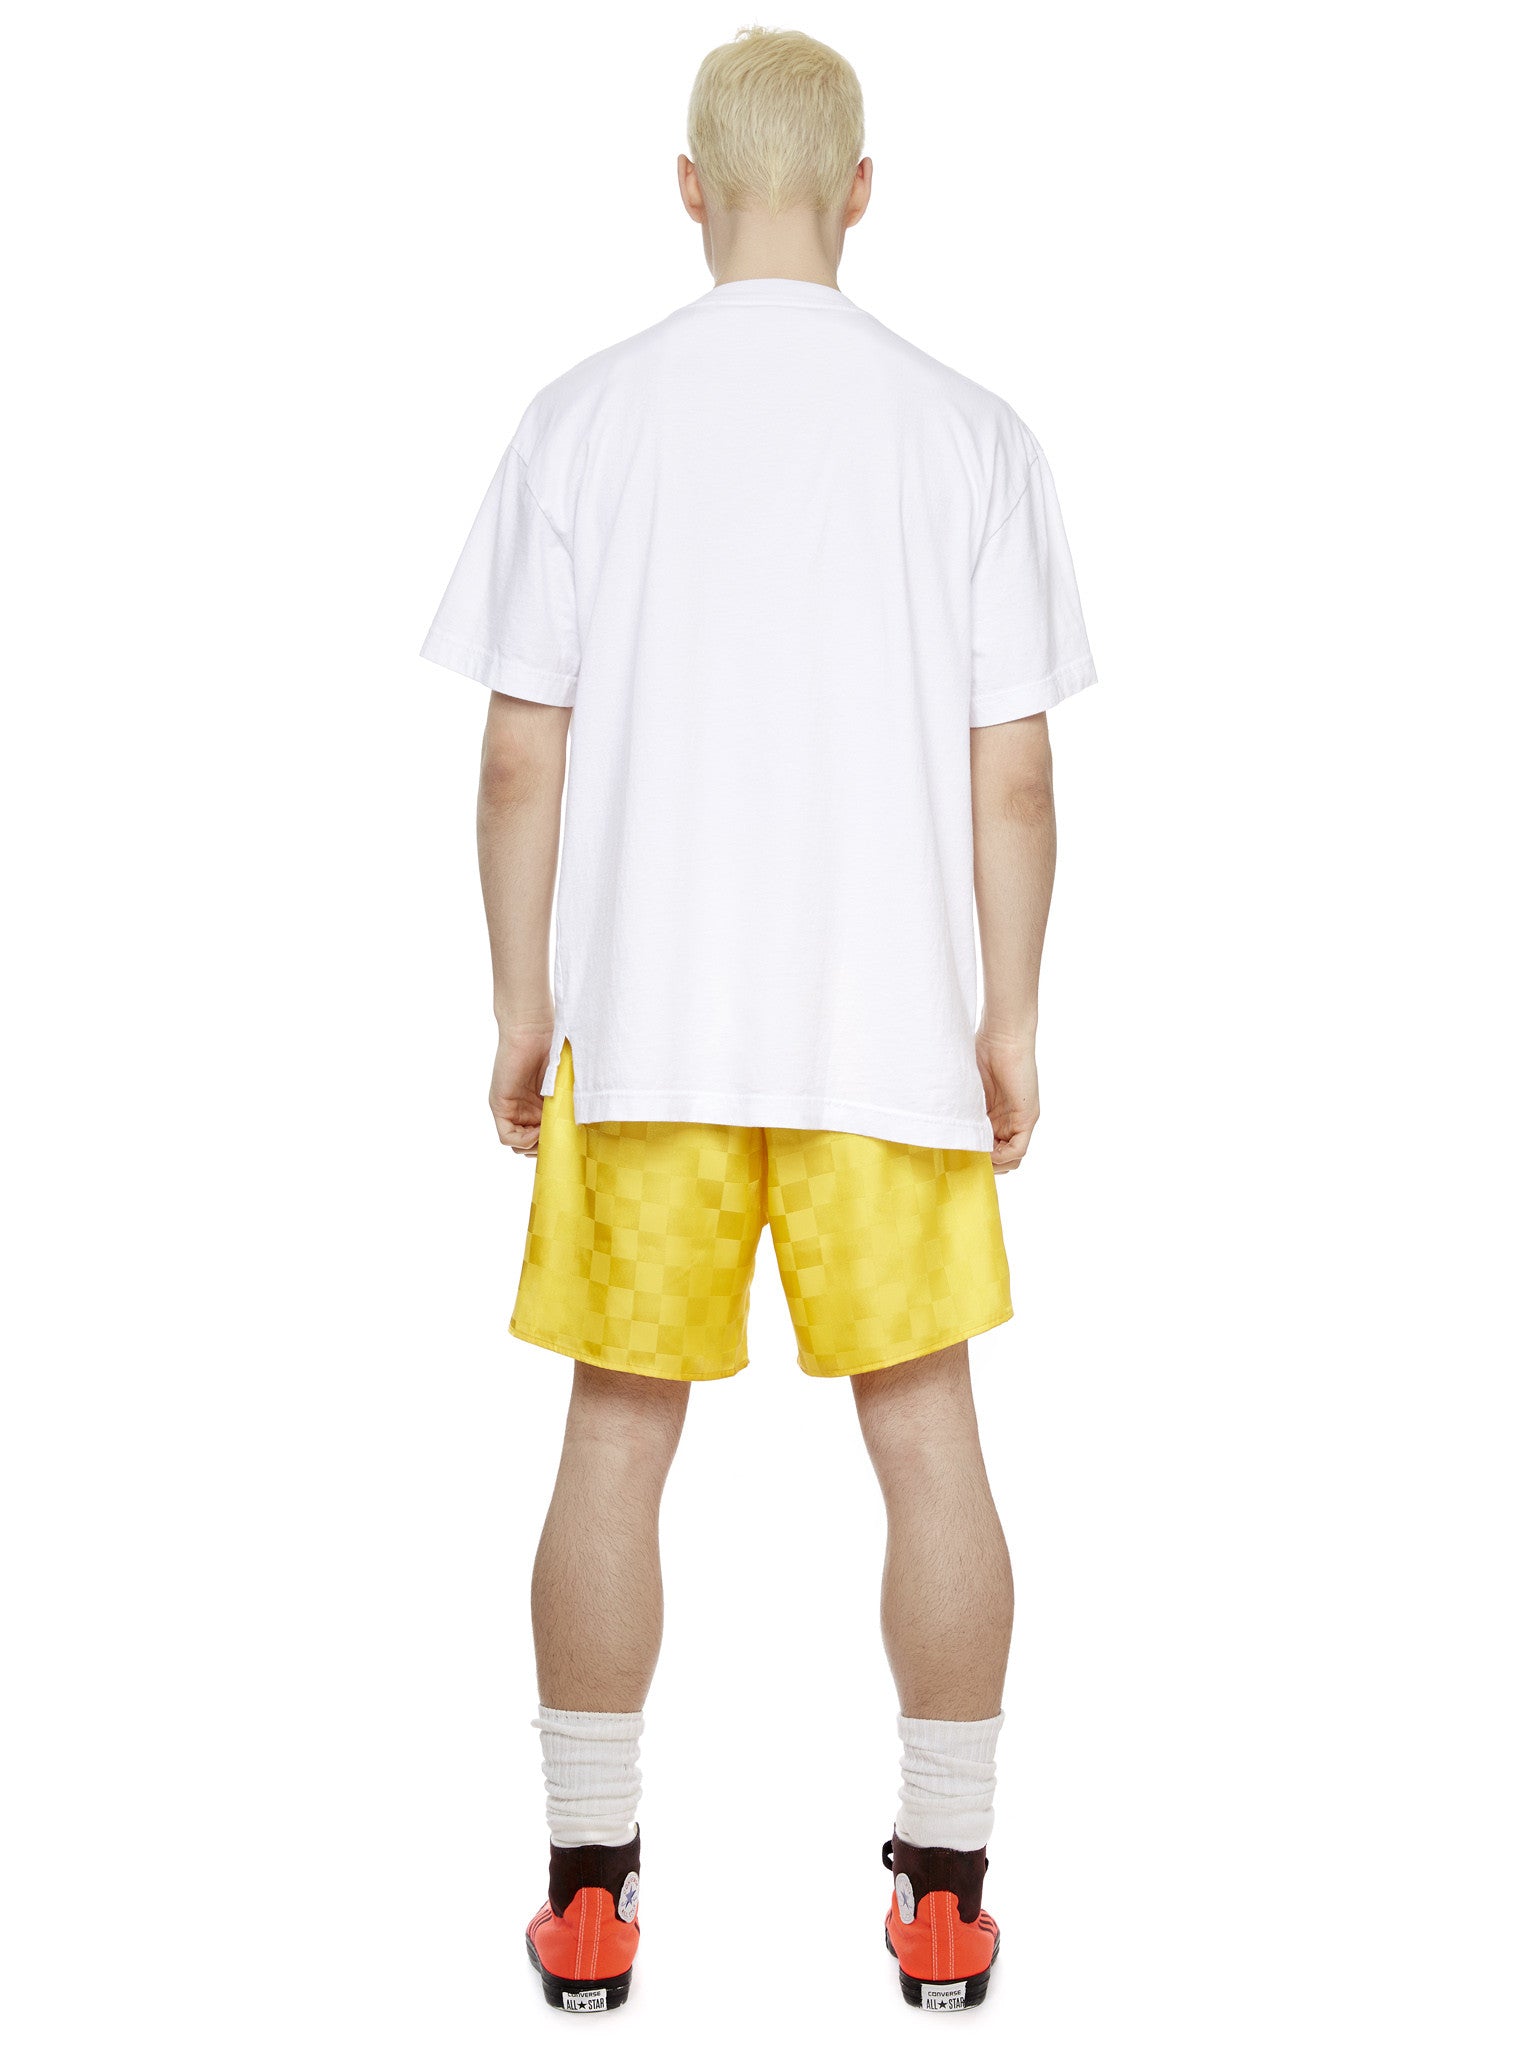 S/S Logo T-Shirt in White/Flame Gradient